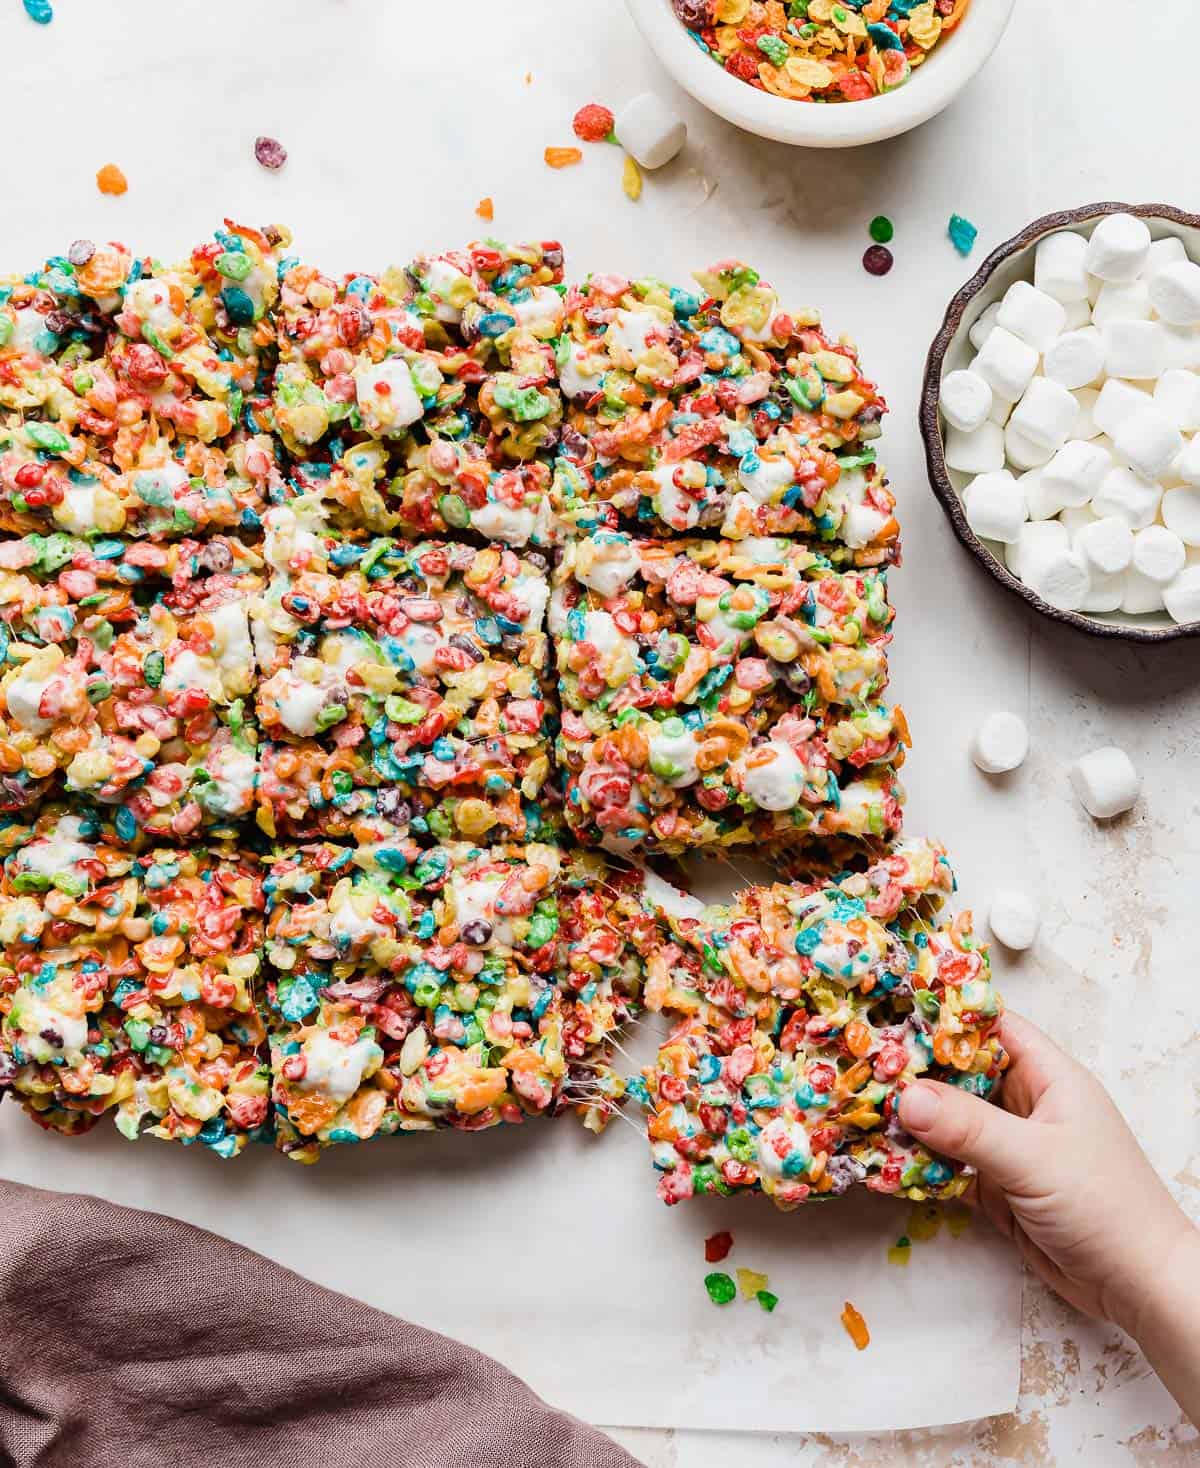 A child's hand grabbing a Fruity Pebble Rice Crispy treat on a parchment paper with mallows around it.